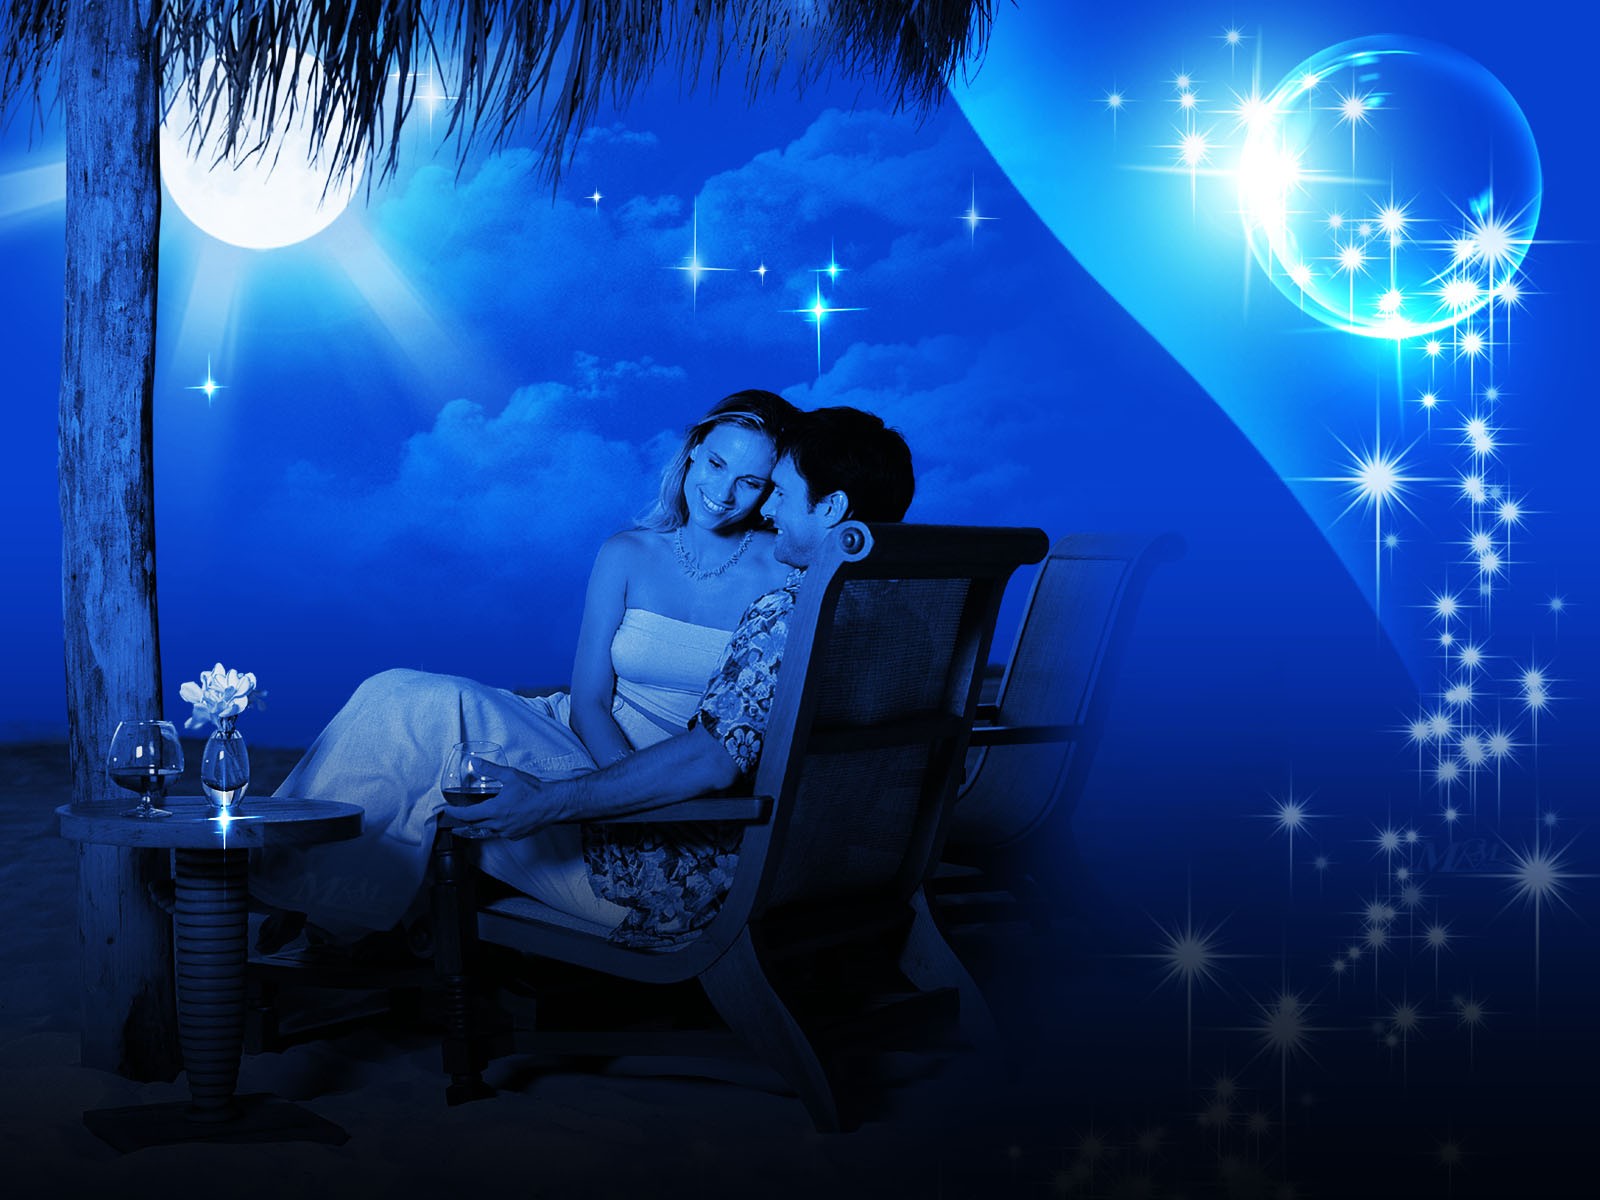 Romantic Love Wallpaper For Valentine S Day HD And